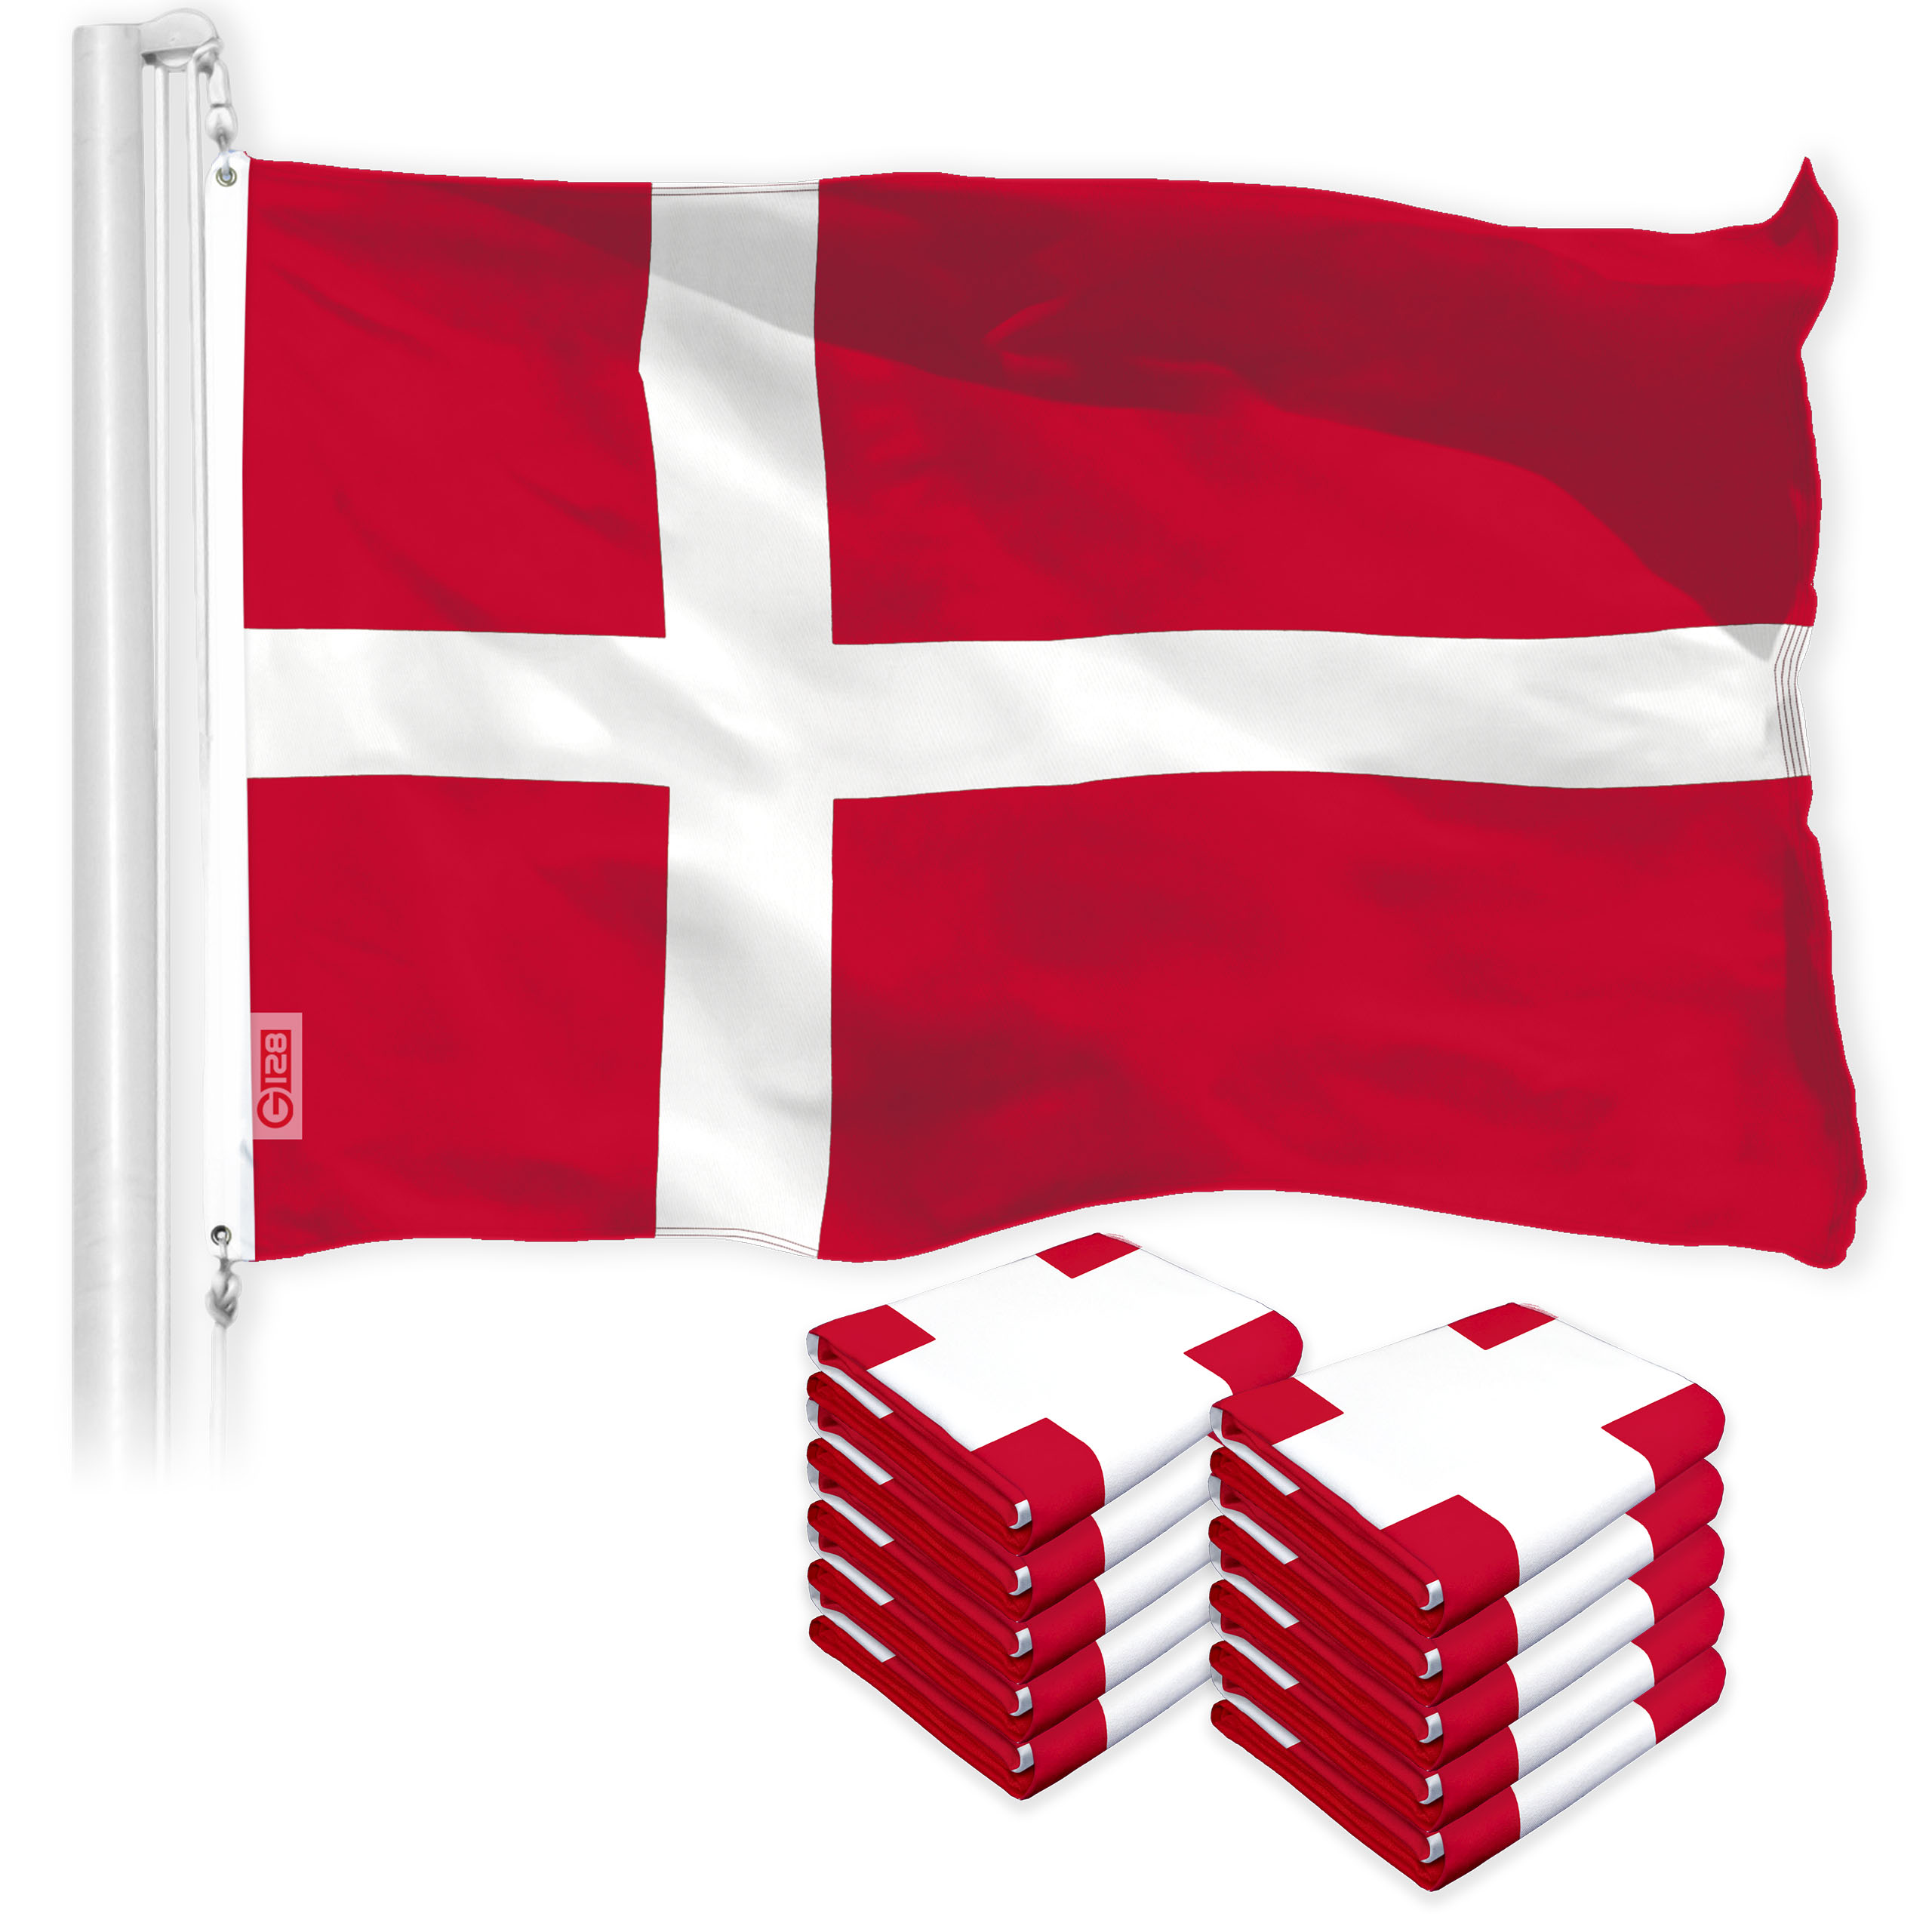 Denmark Danish Flag 3x5FT 10-Pack 150D Printed Polyester By G128 - image 1 of 7